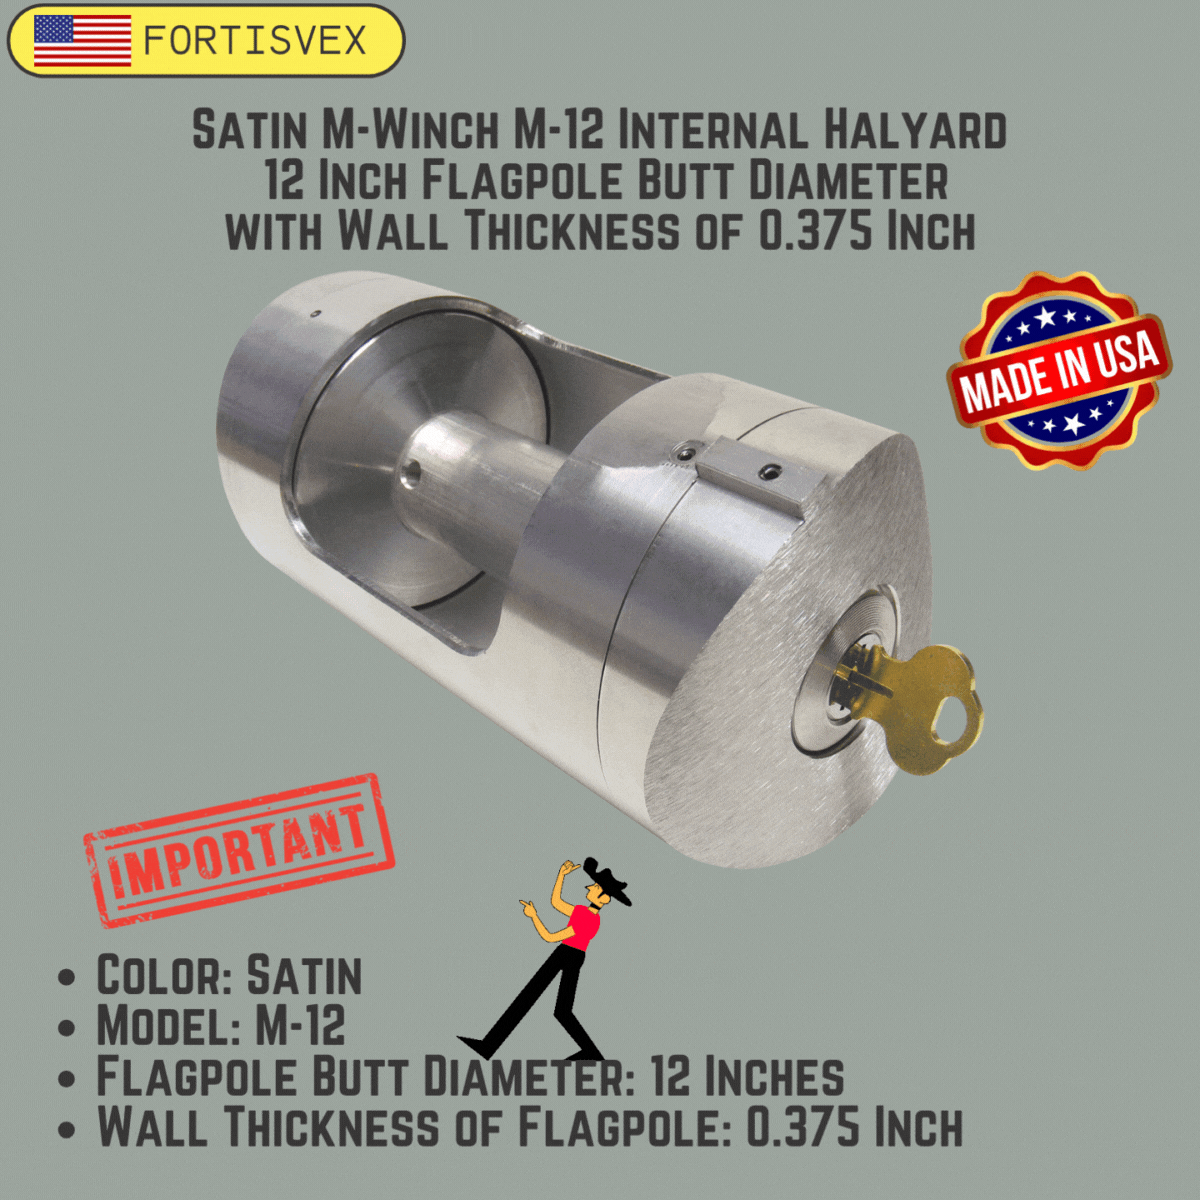 Satin M-Winch M-12 Internal Halyard 12 Inch Flagpole Butt Diameter with Wall Thickness of 0.375 Inch 360006